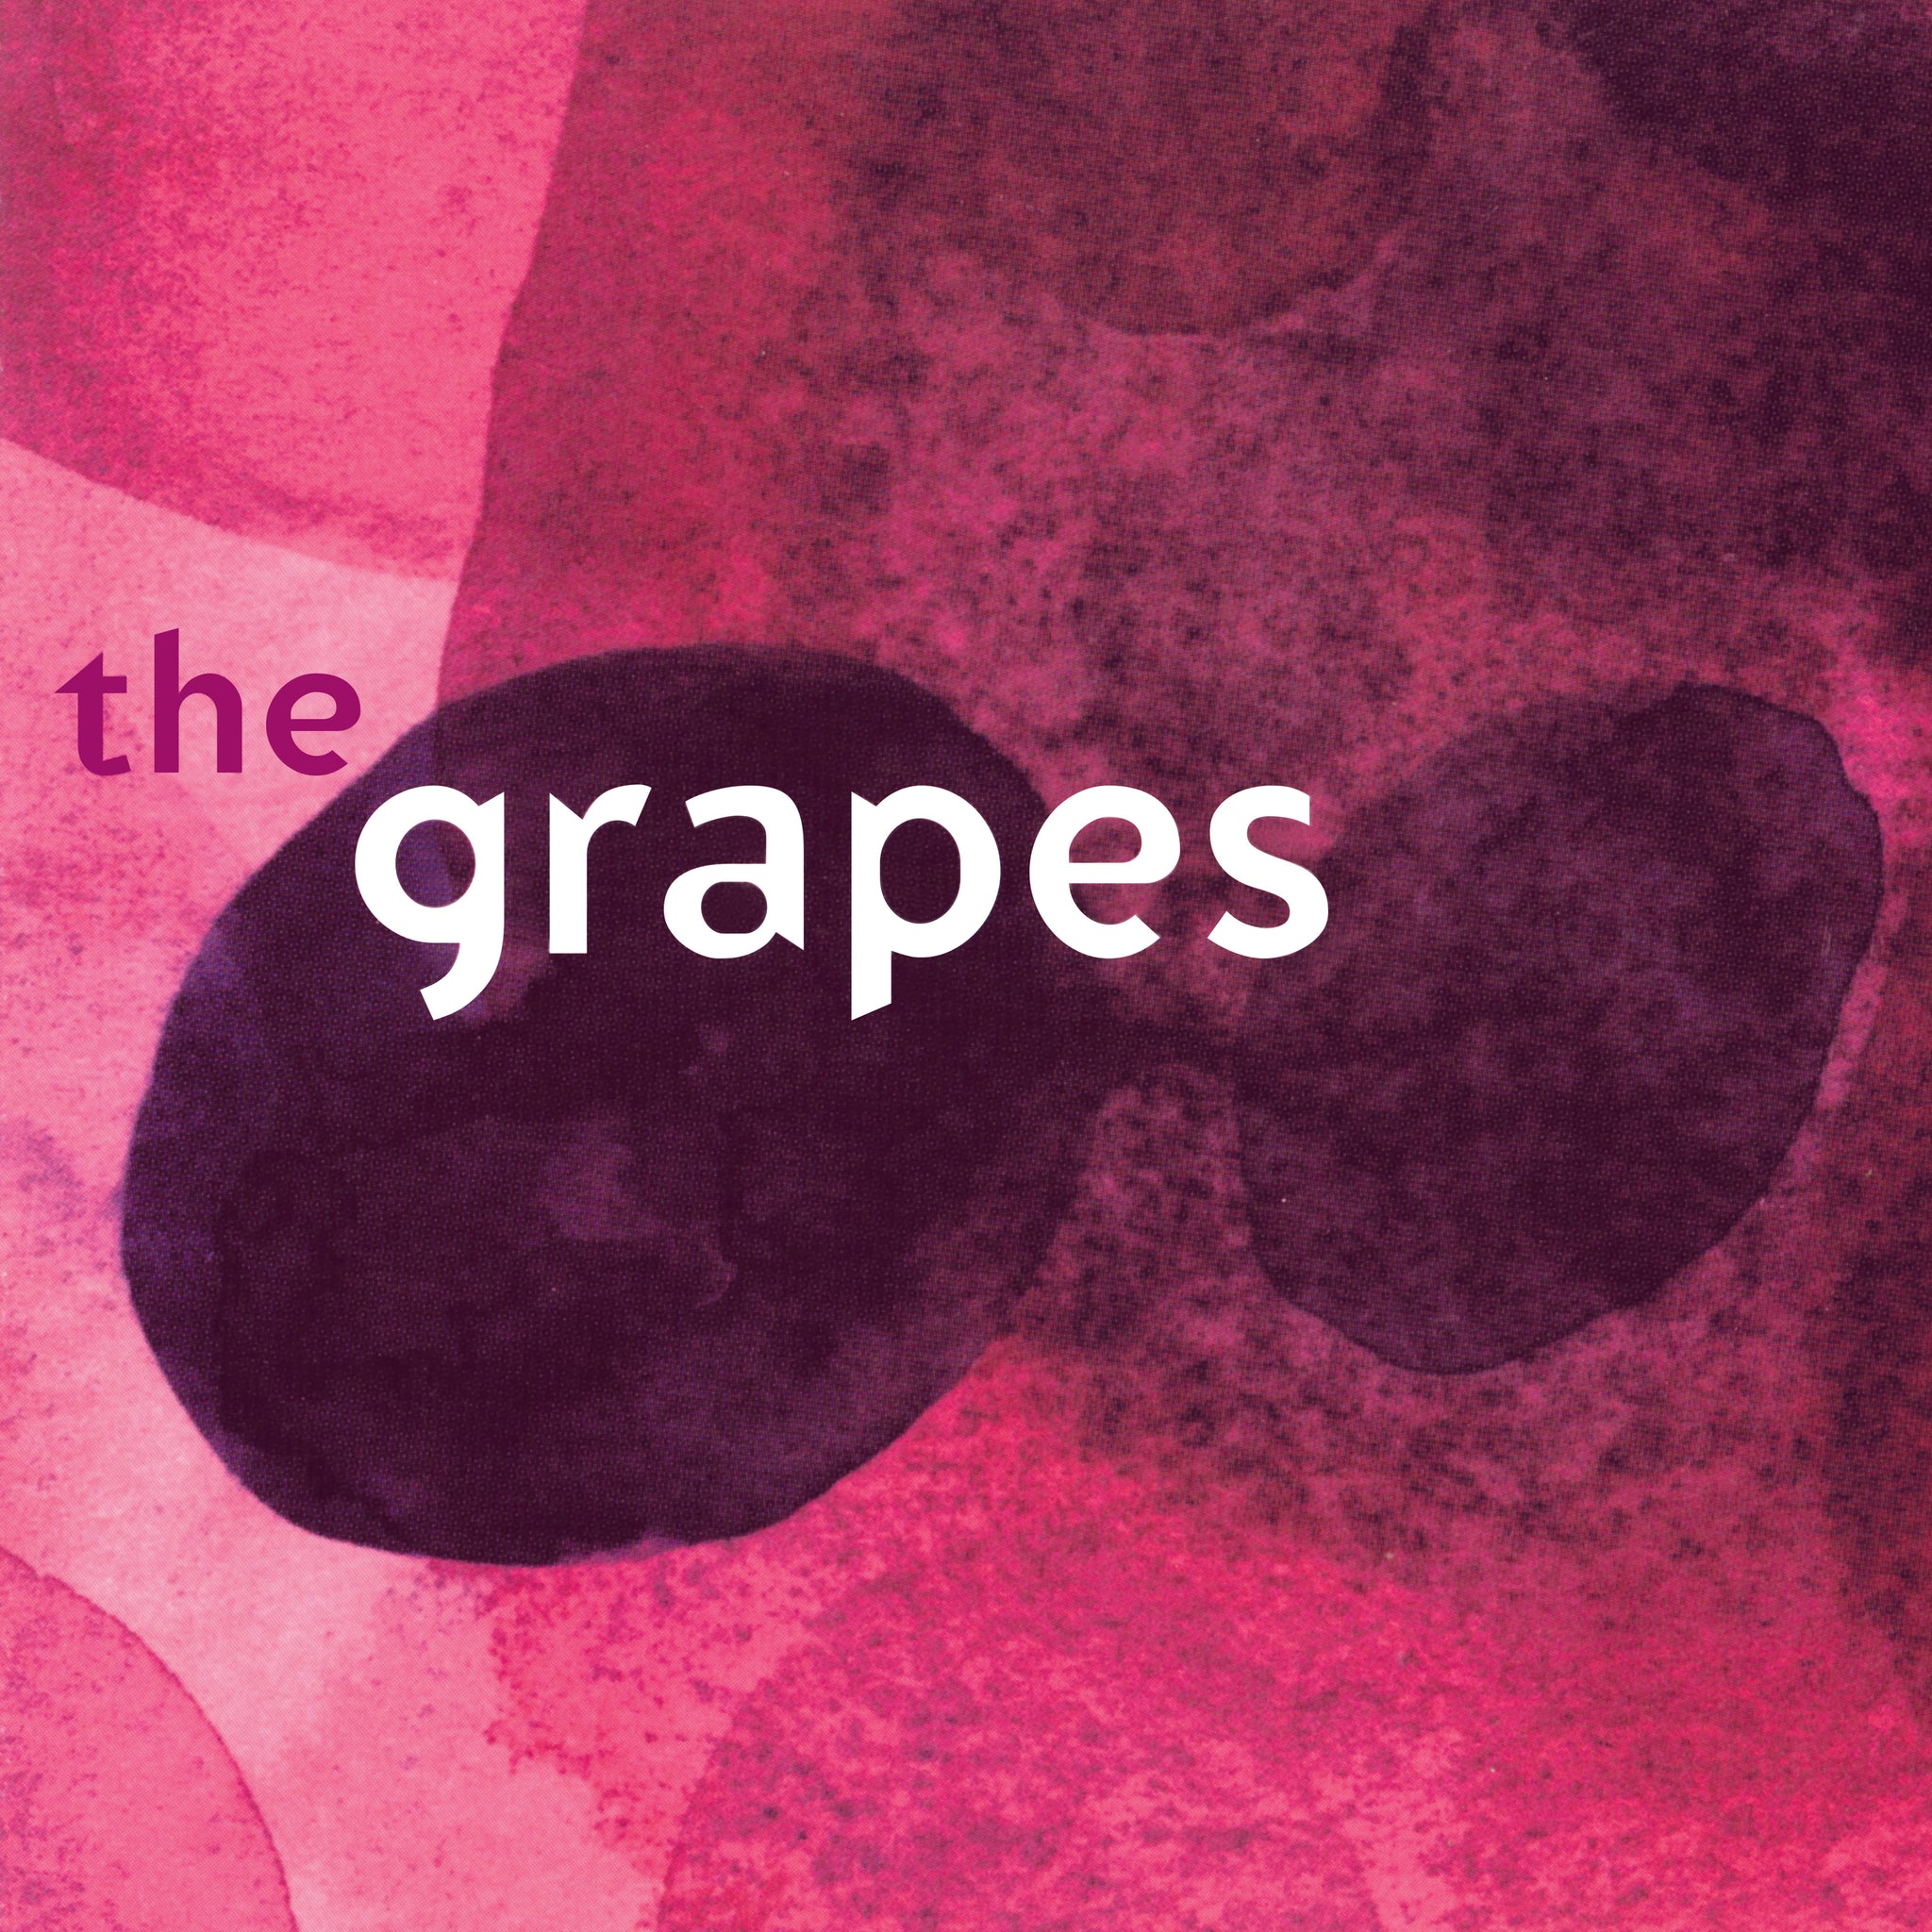 The Grapes - The Grapes (20TH ANNIVERSARY GRAPE COLOURED VINYL - REMASTERED)